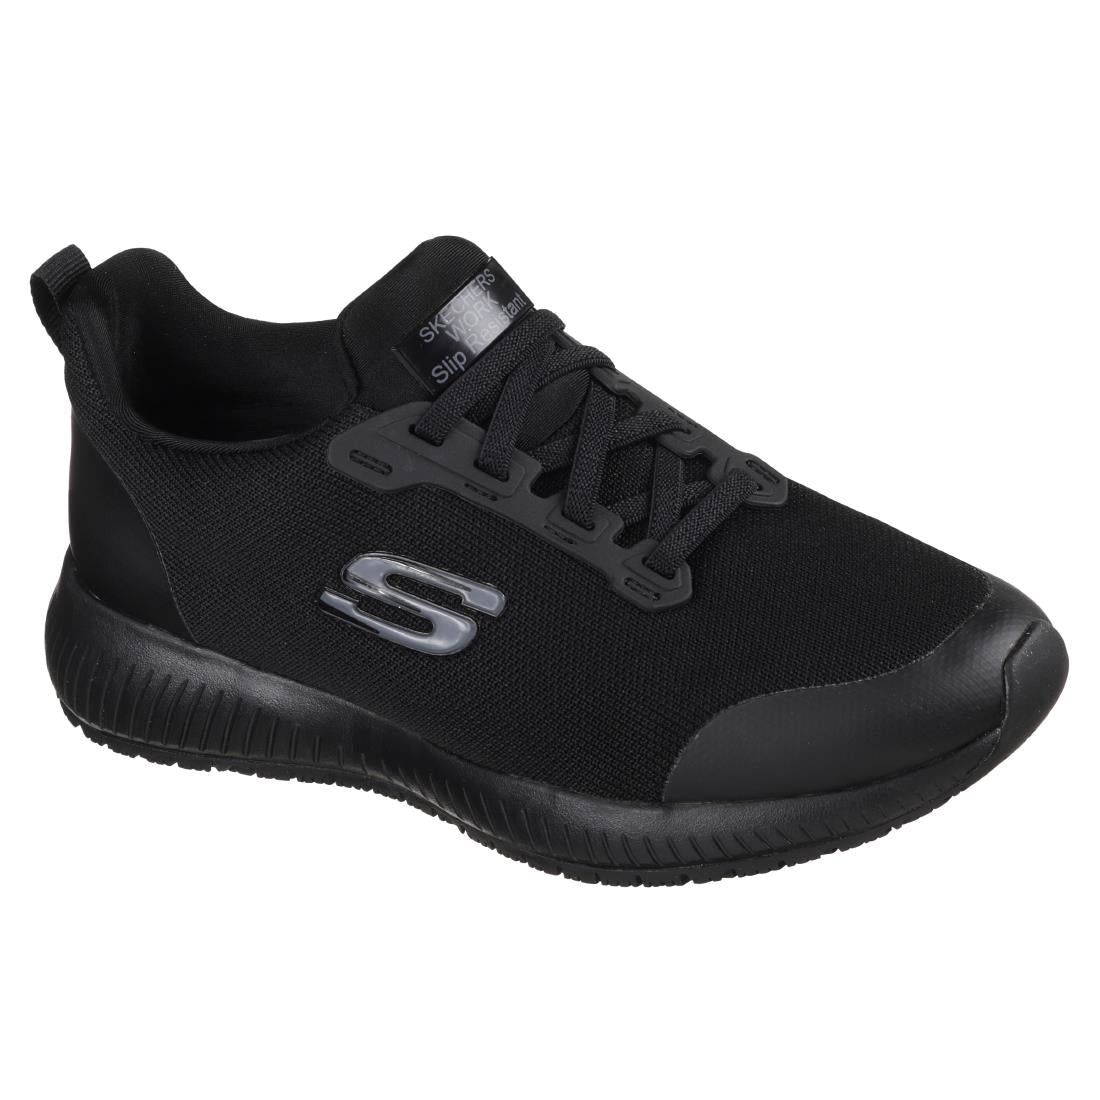 BB672-37 Skechers Womens Slip Resistant Squad Trainer Size 37 JD Catering Equipment Solutions Ltd